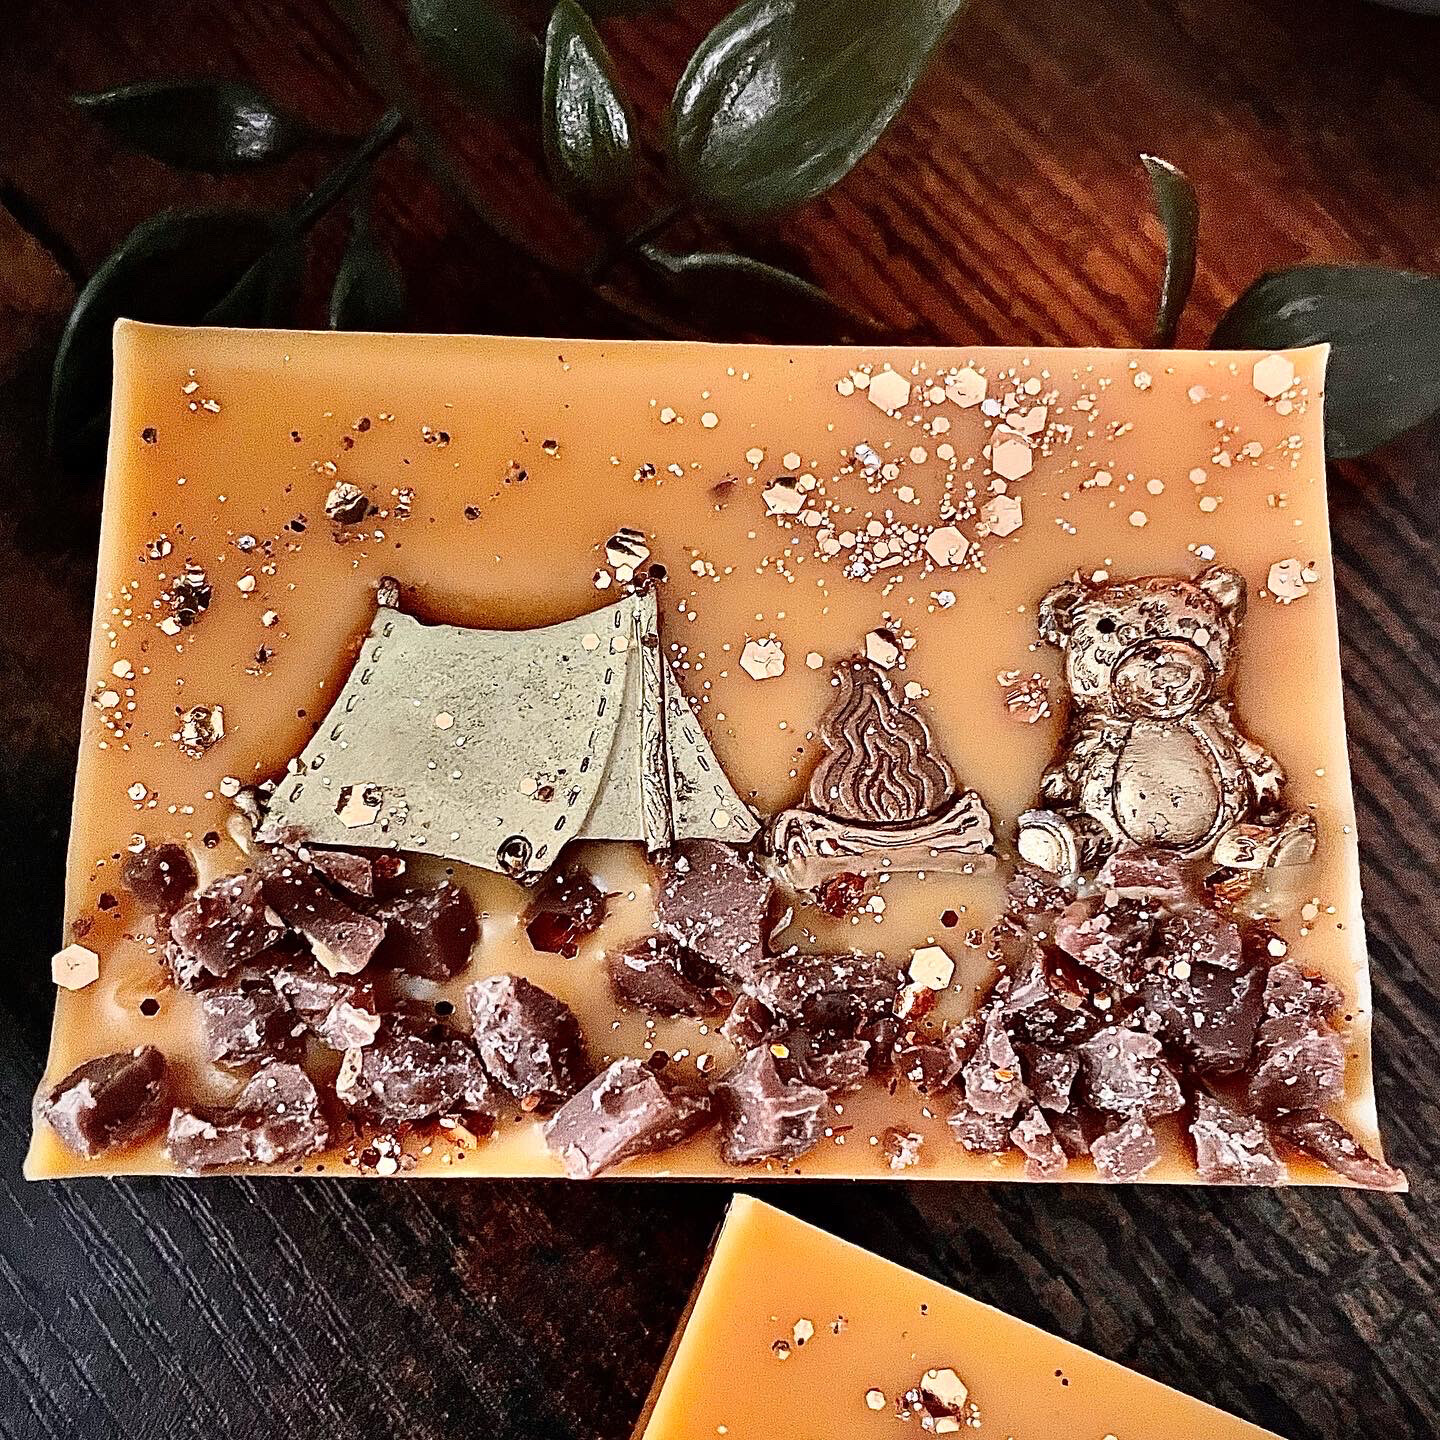 Mandarin & Sandalwood Soy Wax Melt “Have You Been Down To The Woods?” Slab